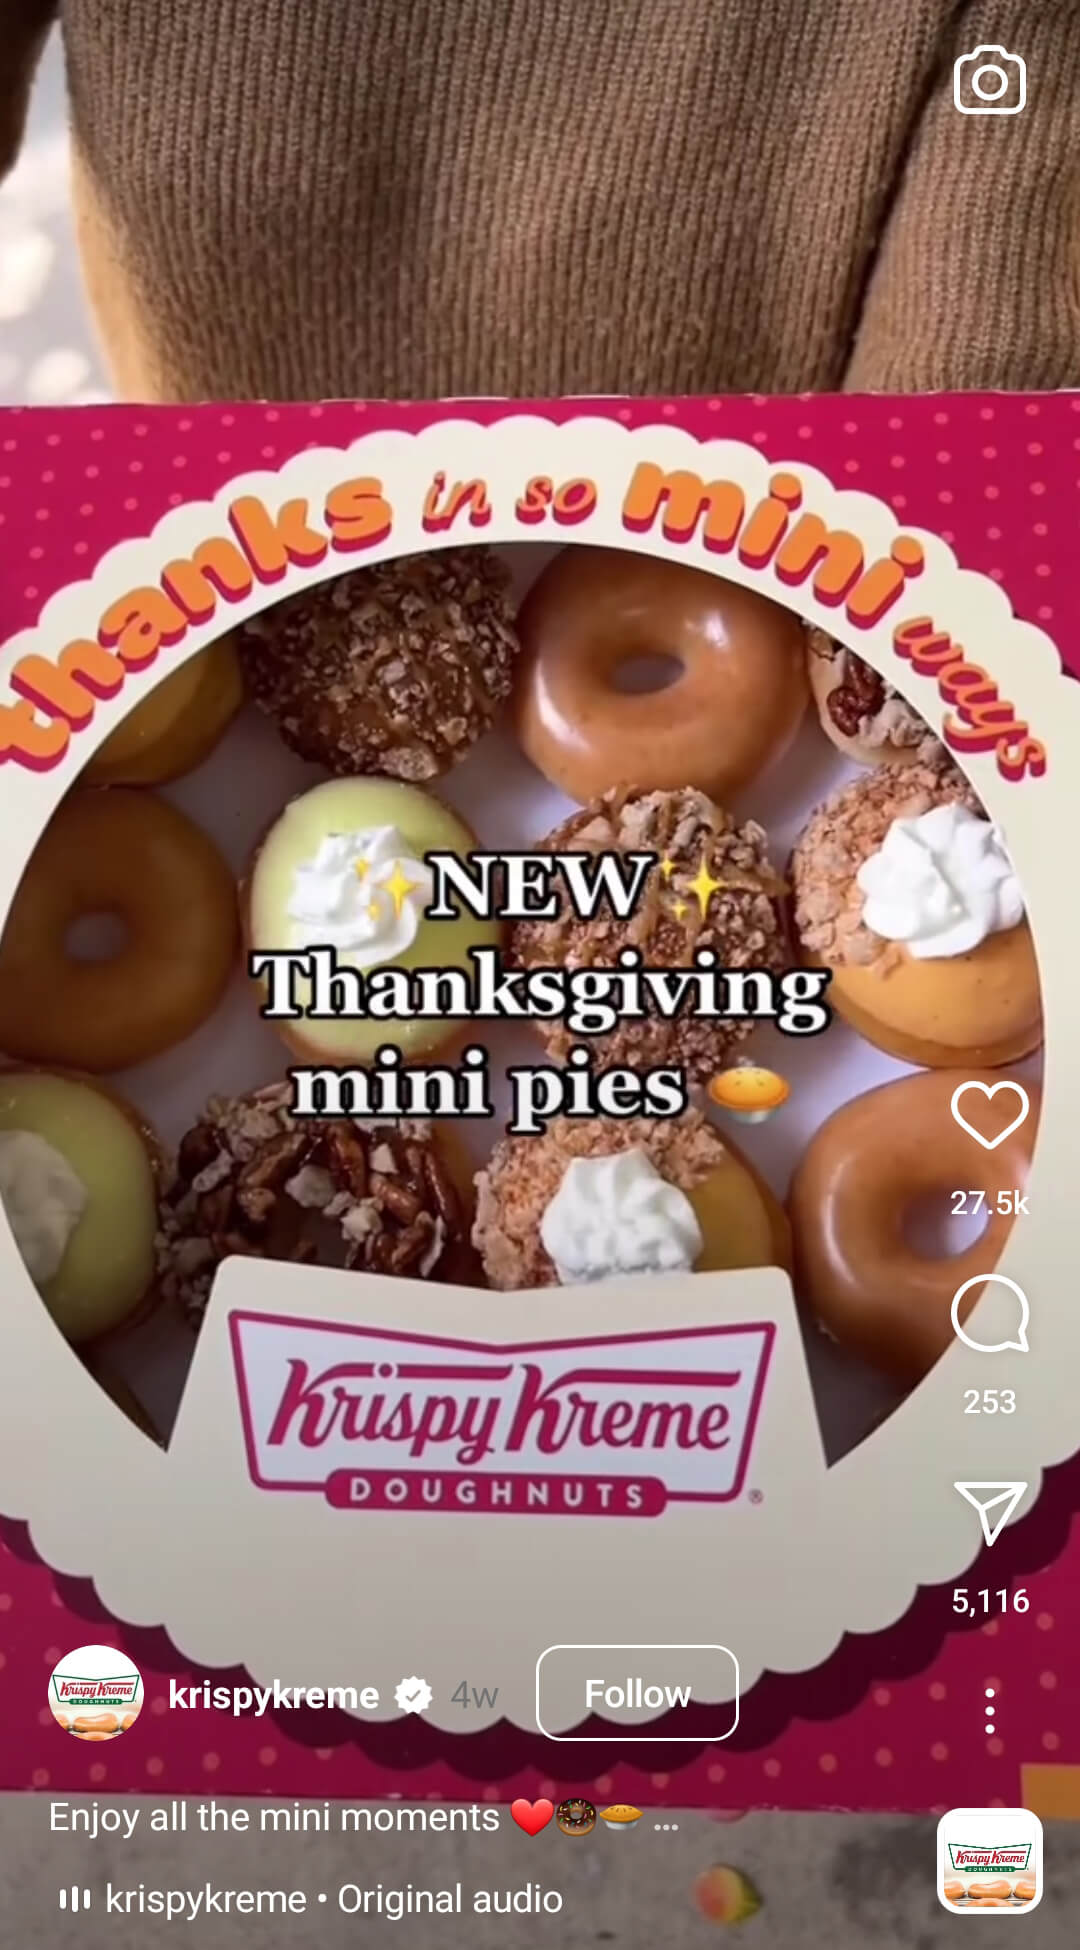 how-to-create-engaging-instagram-reels-boost-engagement-new-product-announcements-generate-comments-and-shares-product-footage-lifestlye-content-text-overlays-krispykreme-example-4